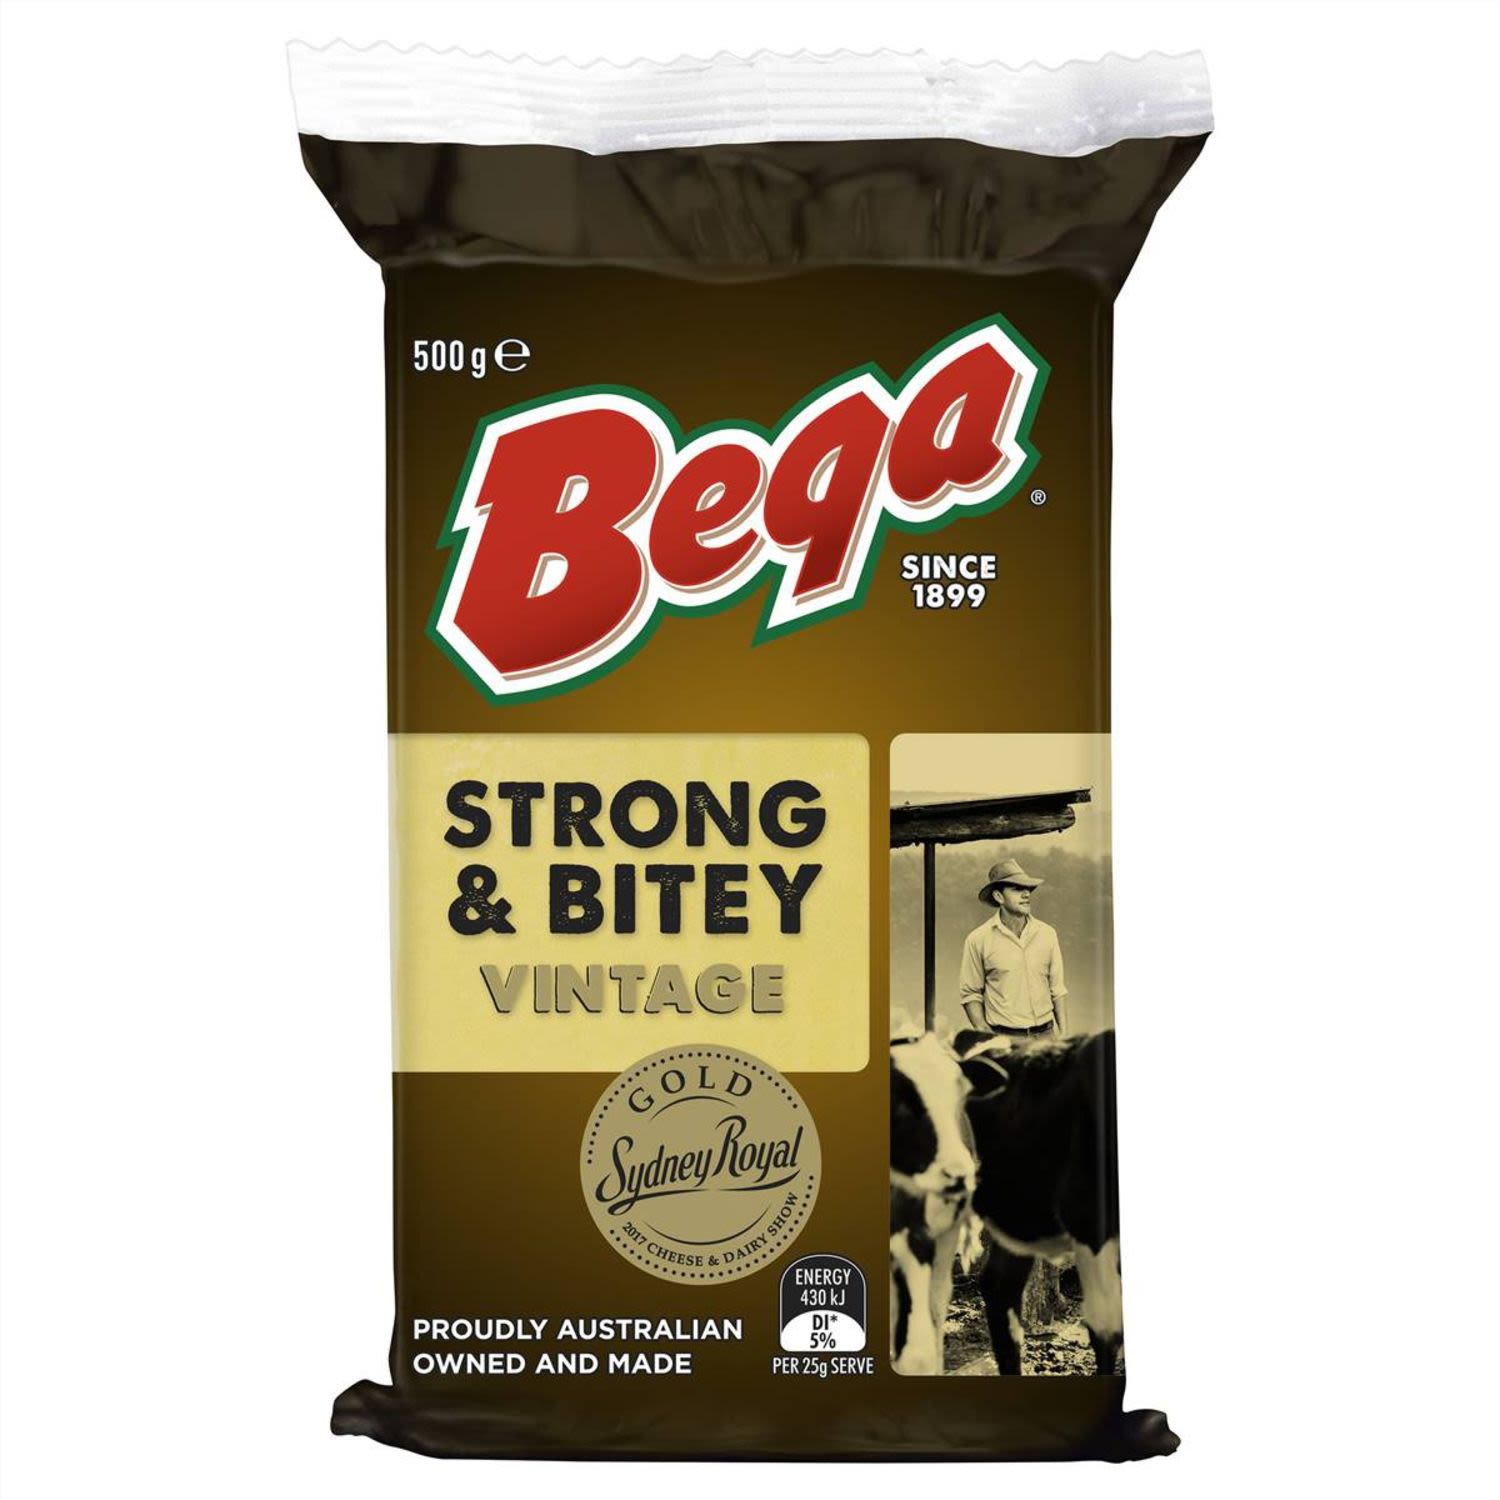 Proudly Australian owned and made.

100% Natural source of calcium.

What makes bega.. bega? Over 100 years of dairying heritage resulting in the unique bega taste you know and love.<br /> <br />